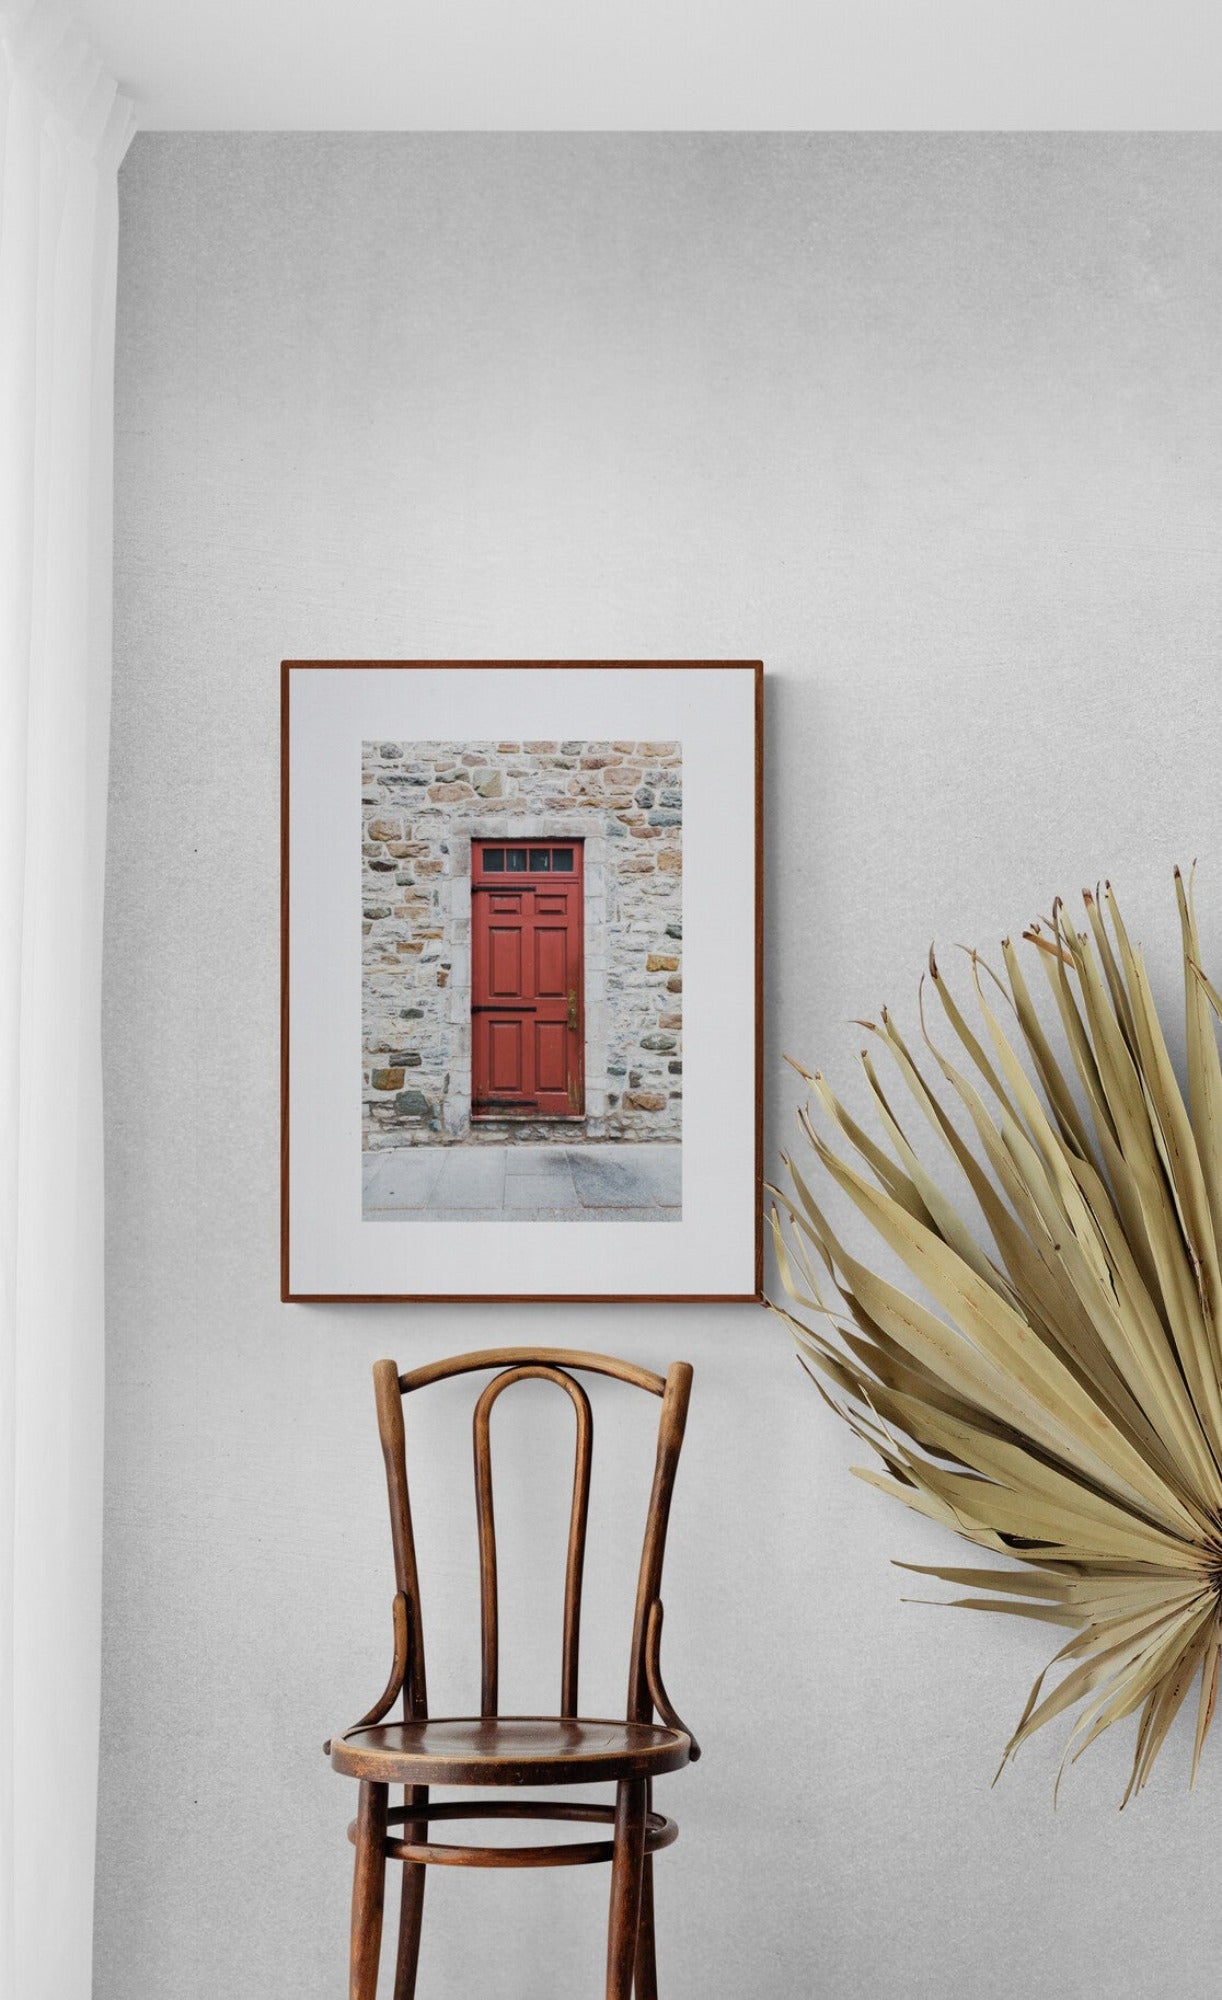 Weathered Red Wood Door of Quebec CIty Photograph Print near a window